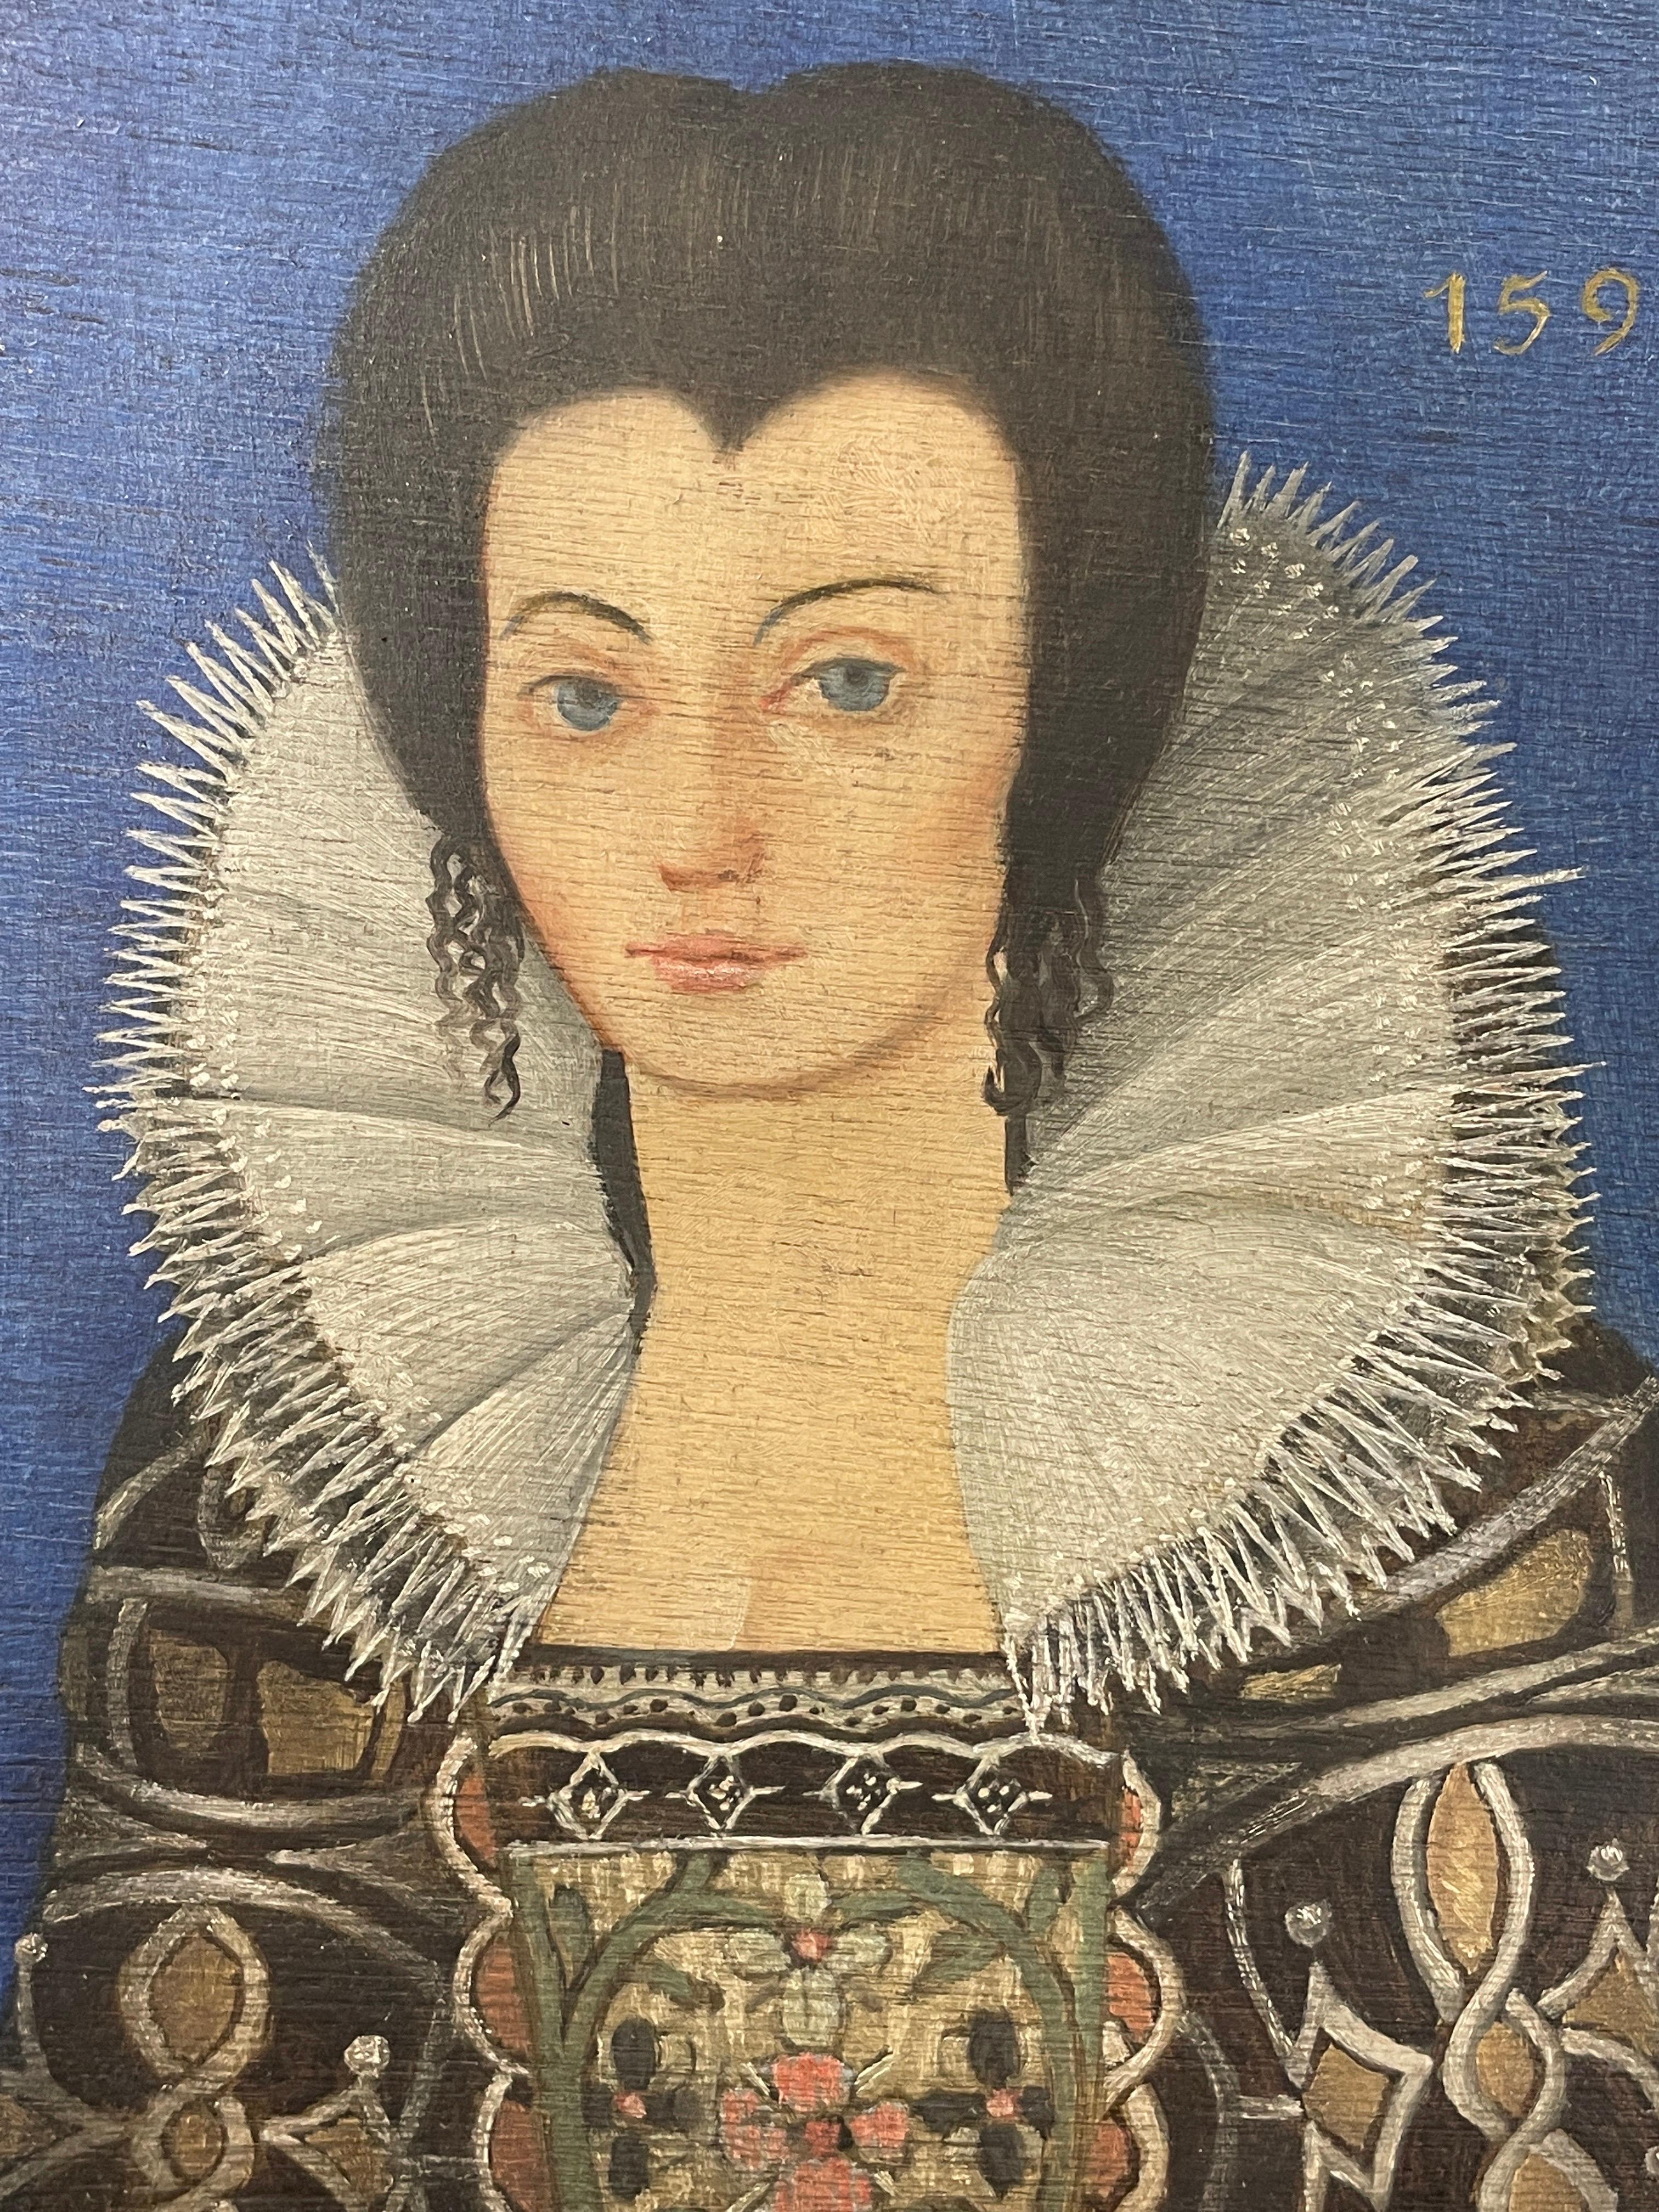 Artist/ School: English School, 20th century, after an earlier 16th century work. 

Title: Portrait of an Elizabethan Lady

Medium: oil on board, framed 

Framed: 16.5 x 13 inches
Board: 13.5 x 10 inches

Provenance: private collection,